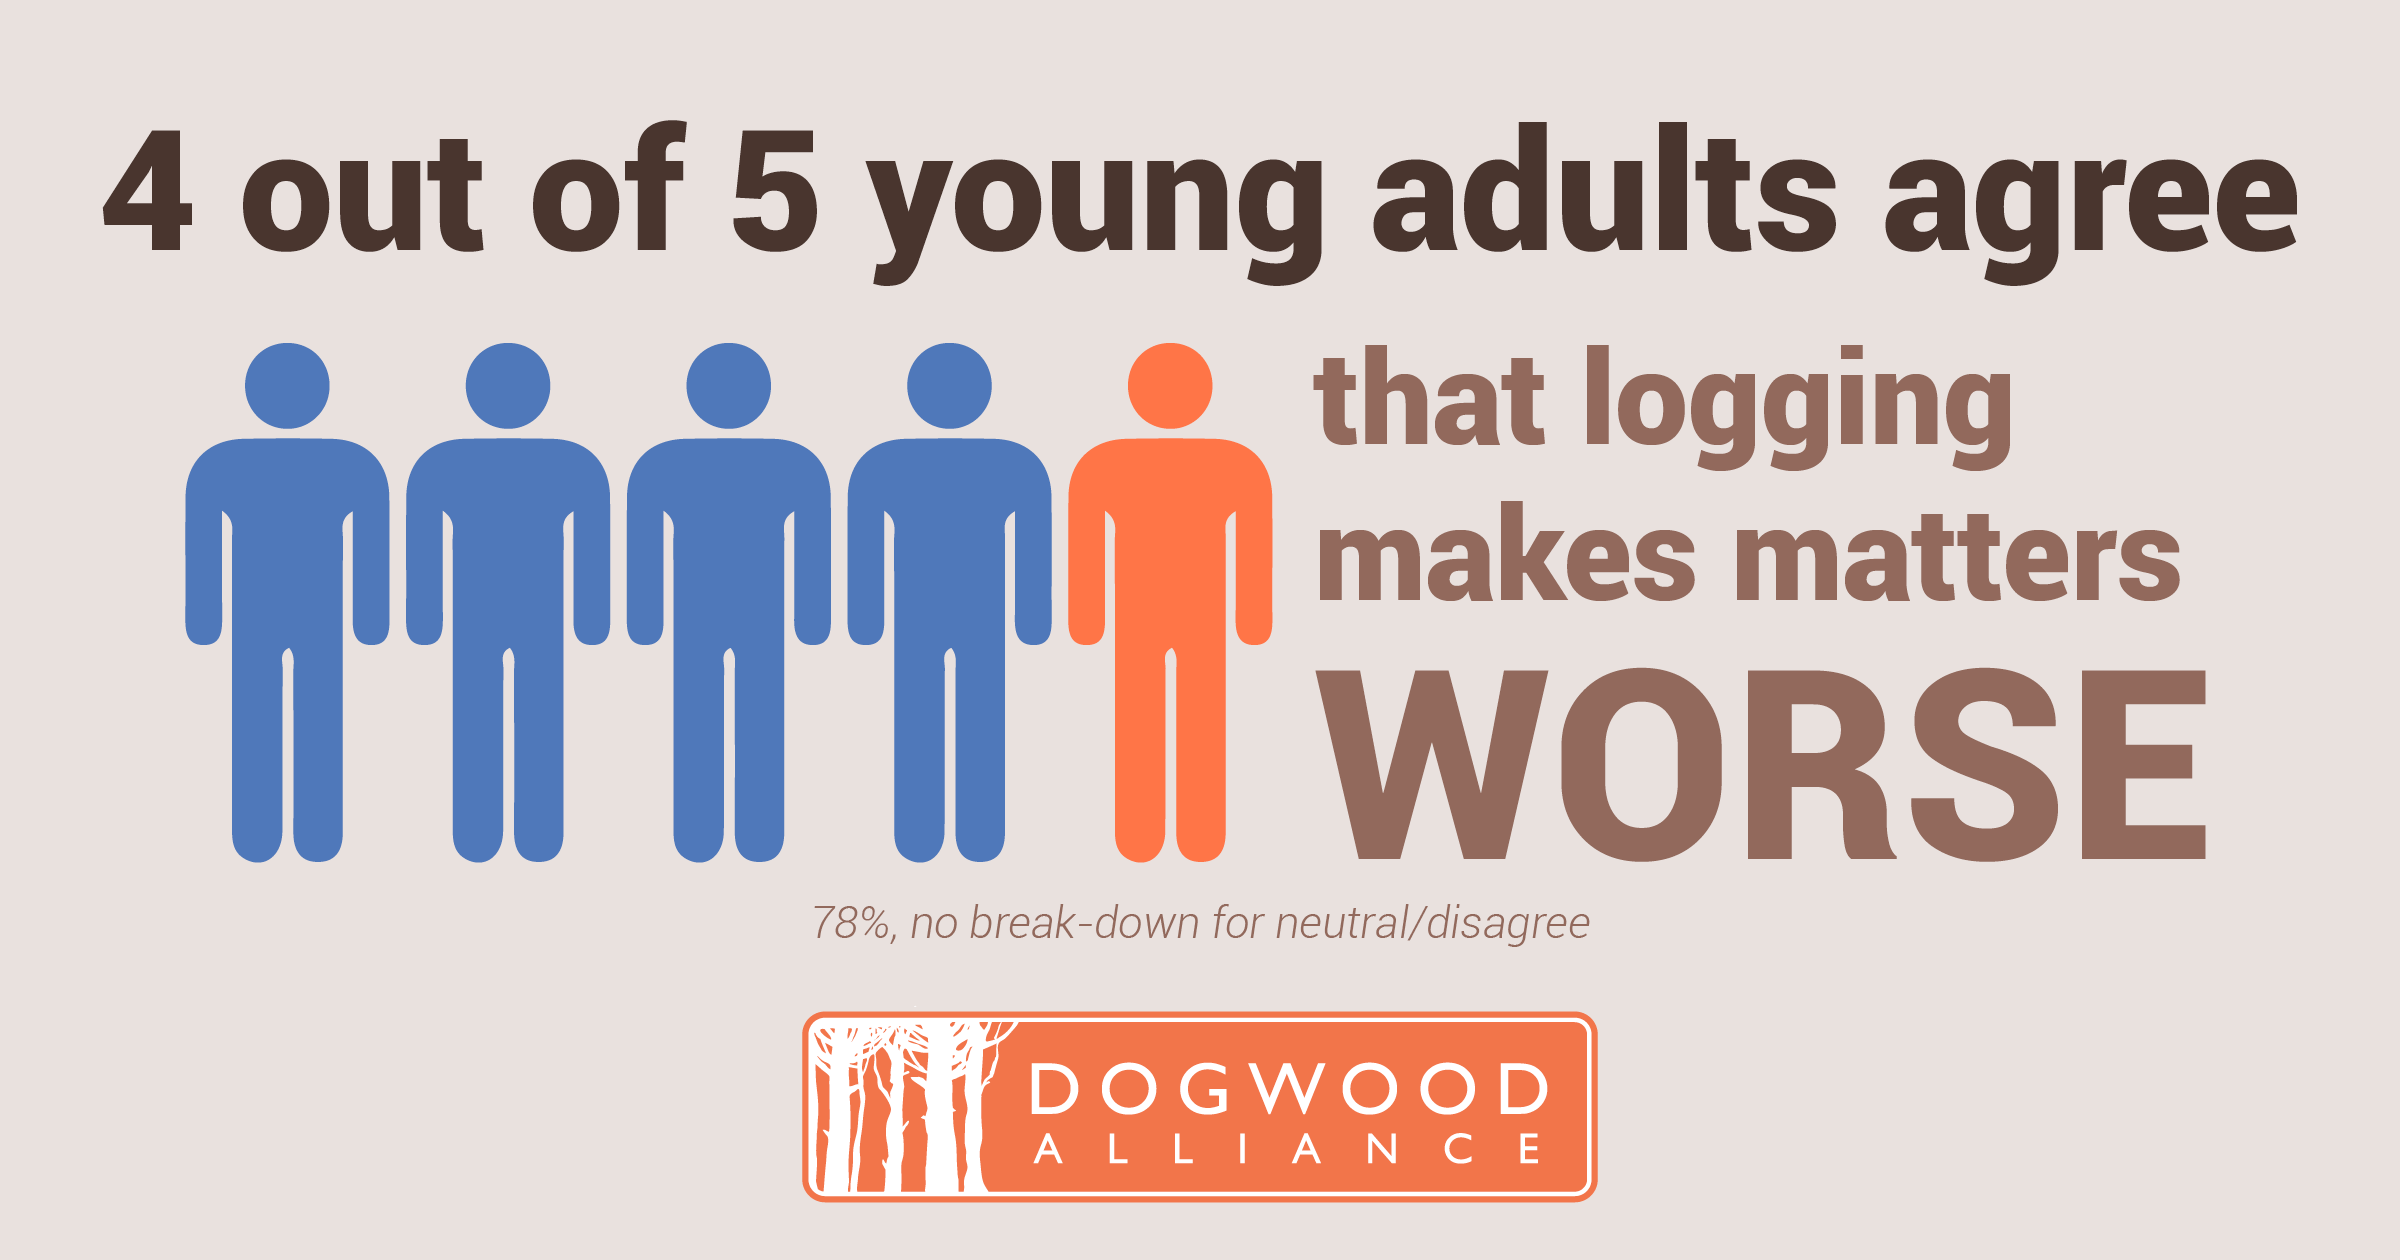 4 out of 5 young adults agree that logging makes matters worse